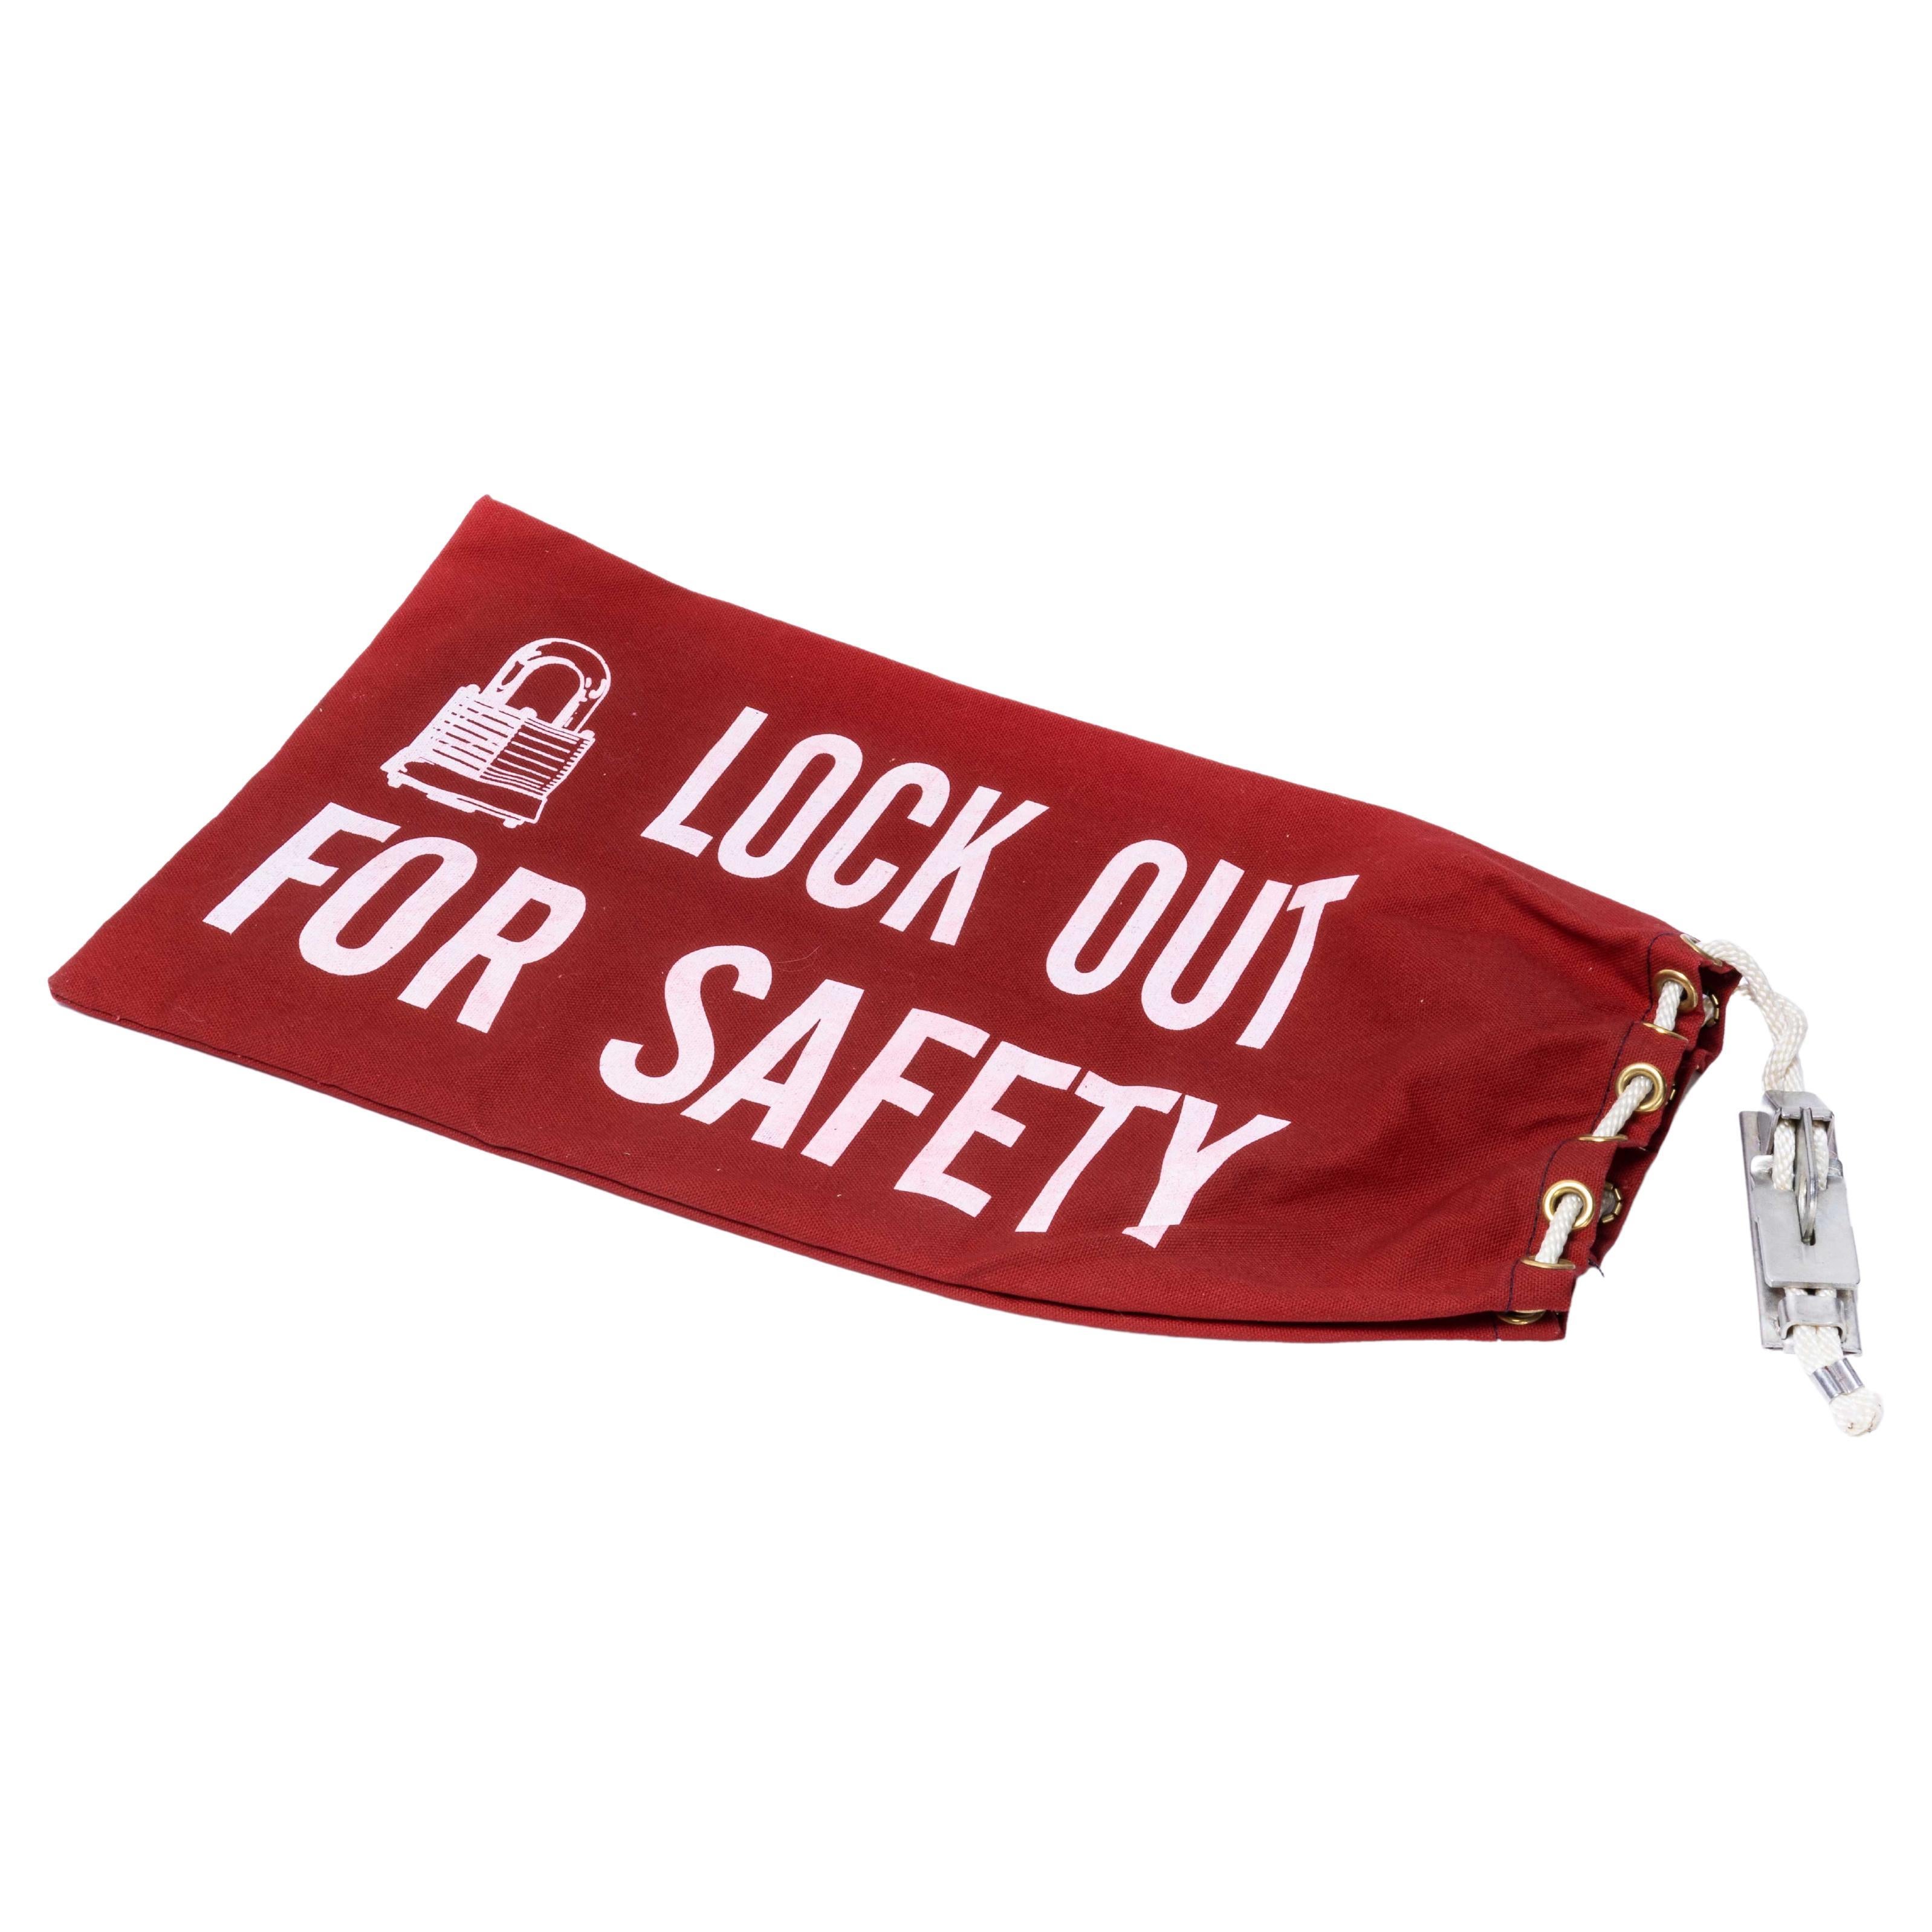 Vintage American Lock Out for Safety Bag For Sale